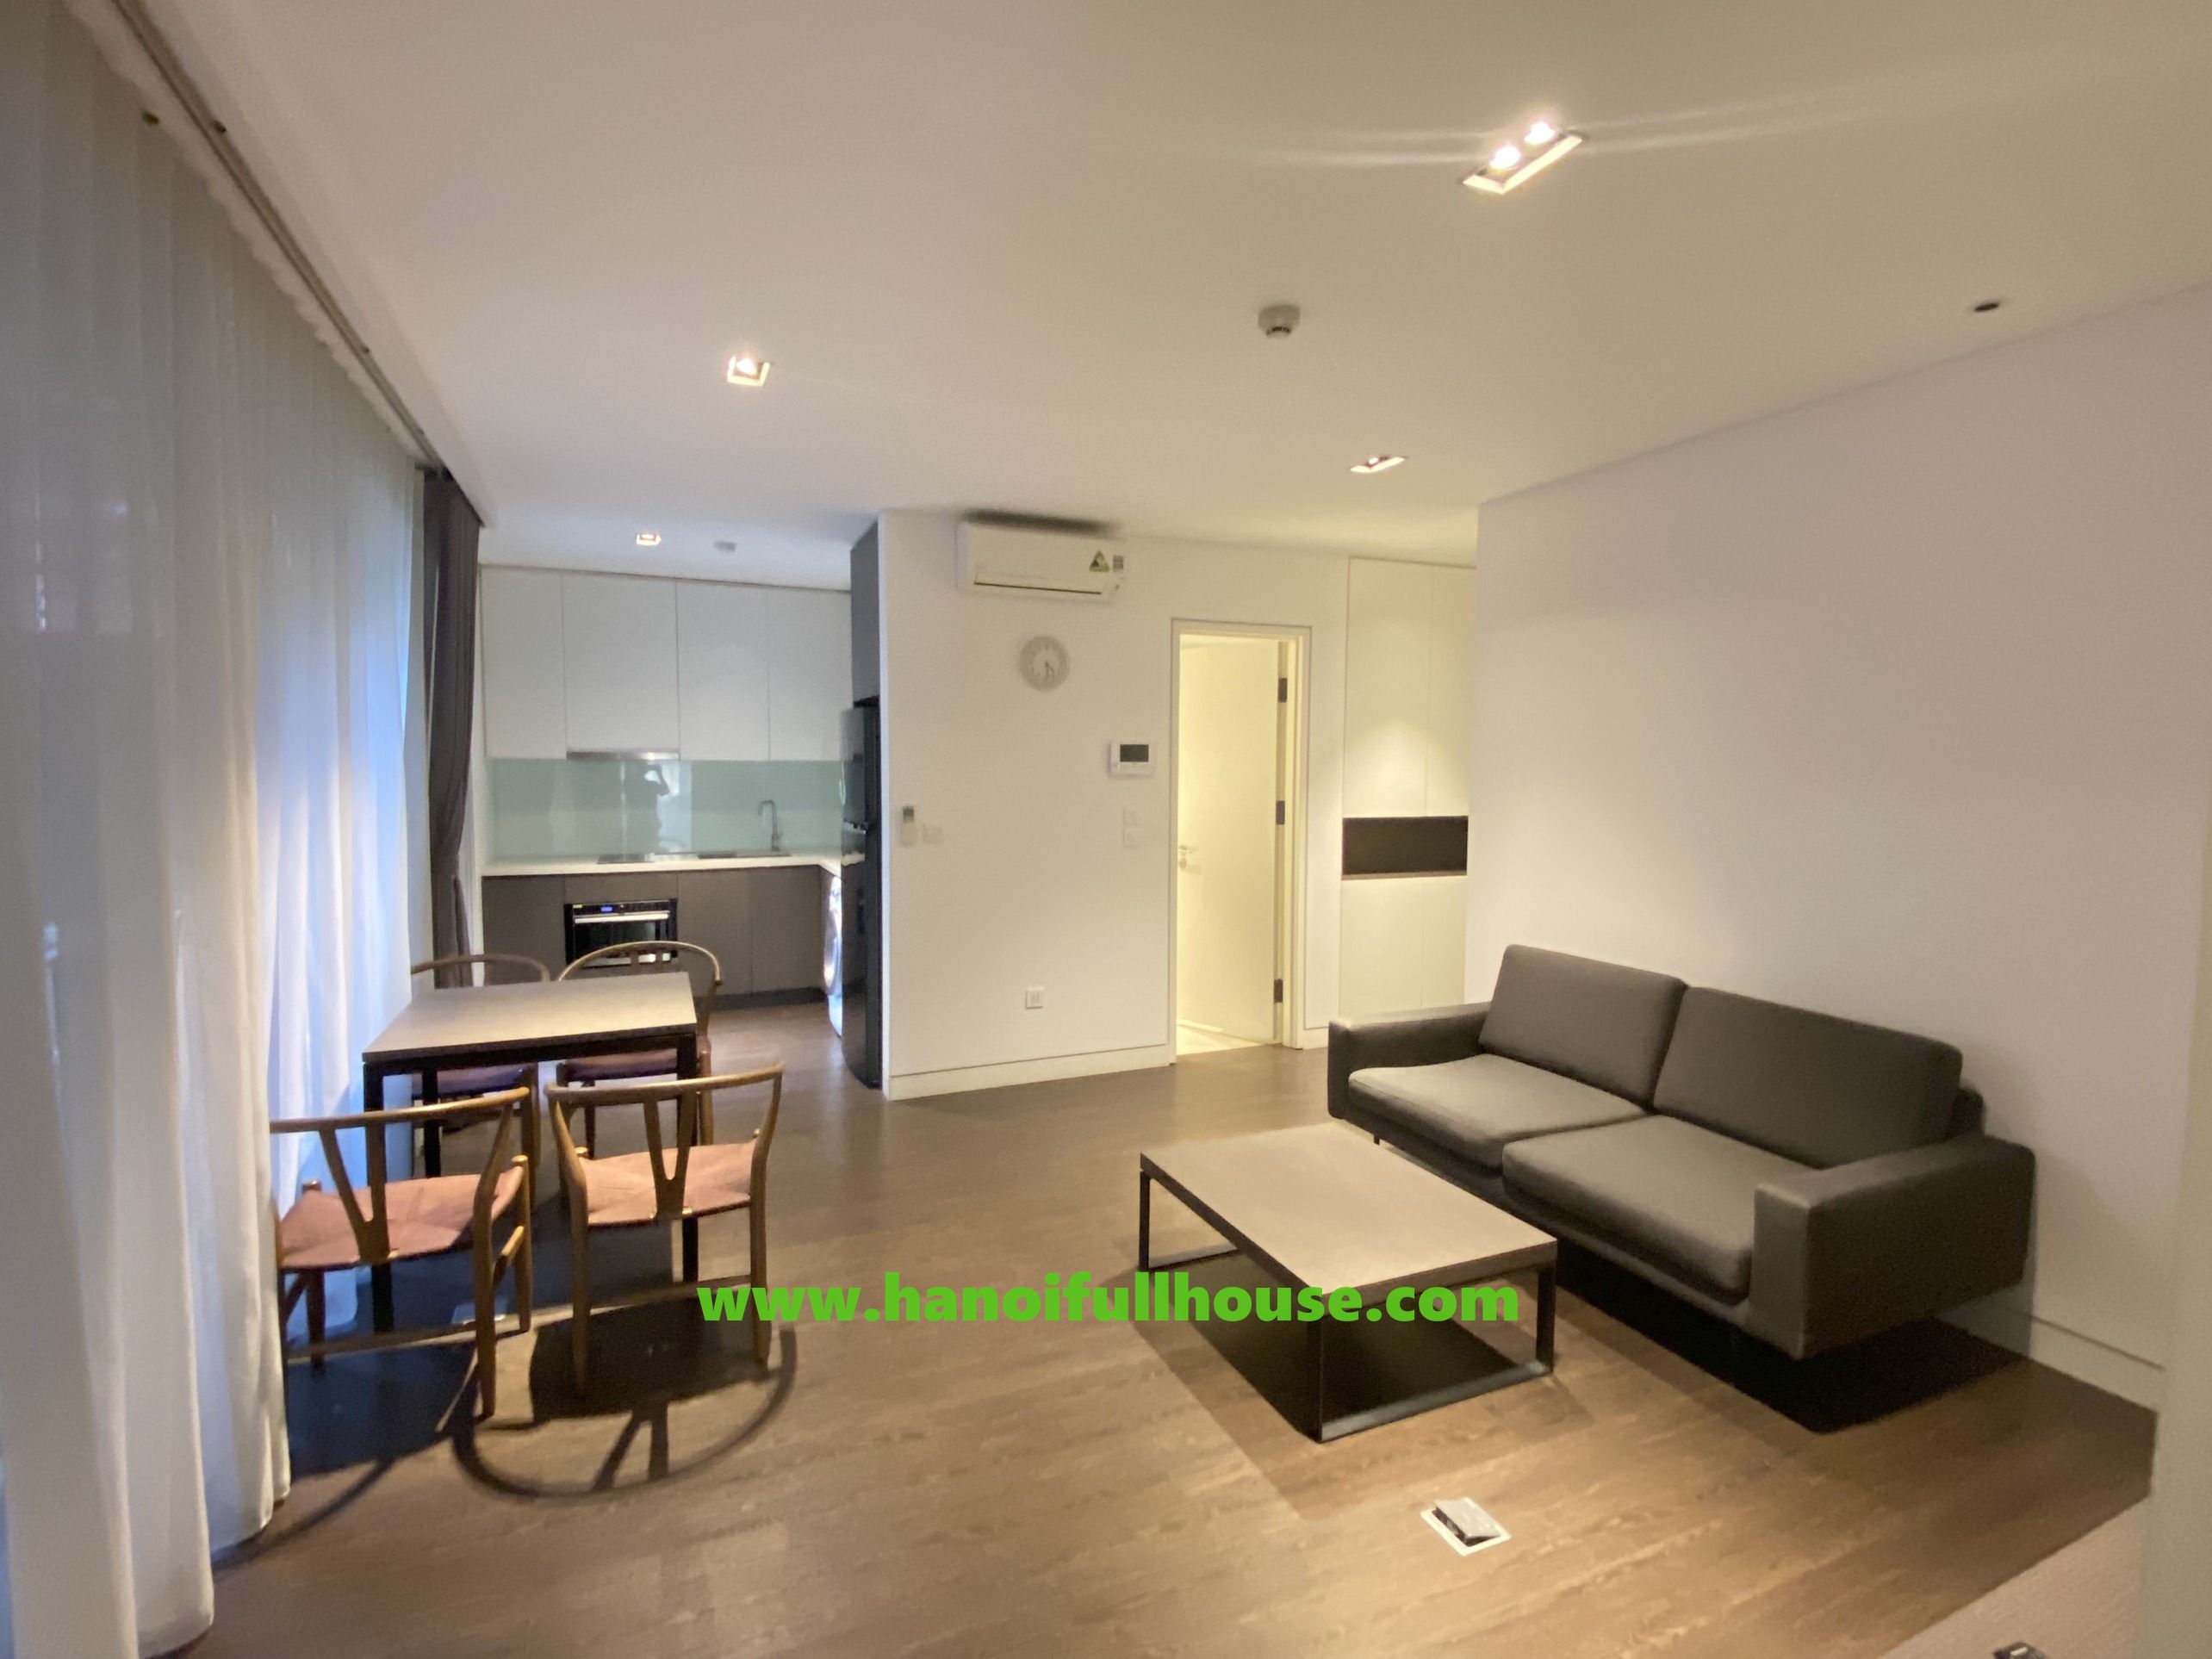 Modern & spacious 1-BR serviced apartment in the heart of Tay Ho district